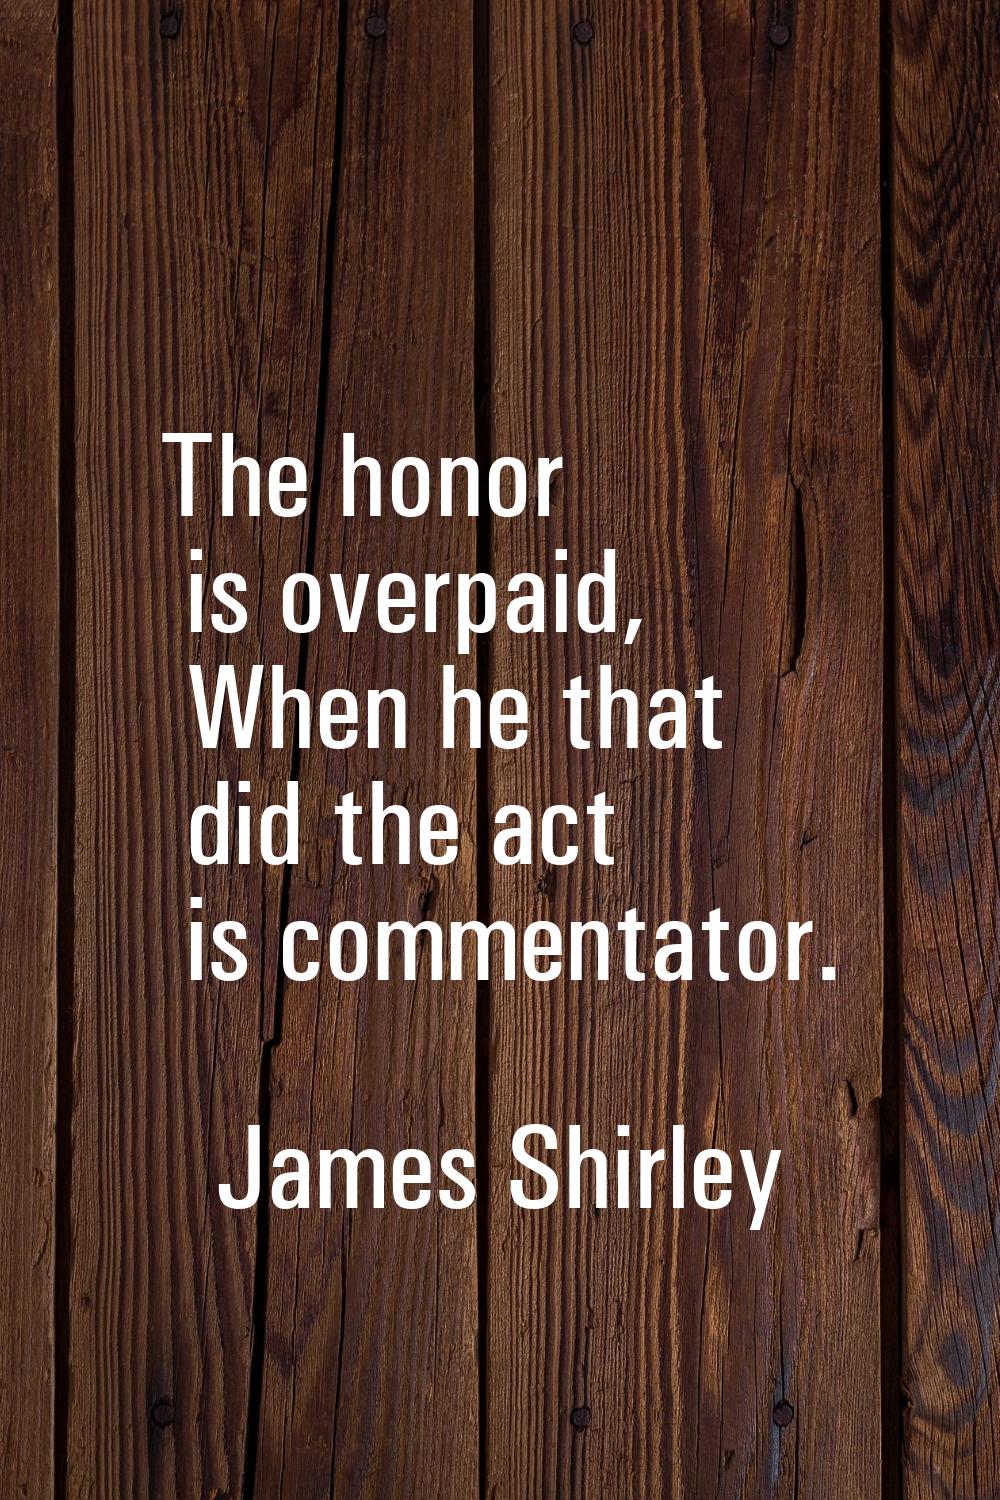 The honor is overpaid, When he that did the act is commentator.